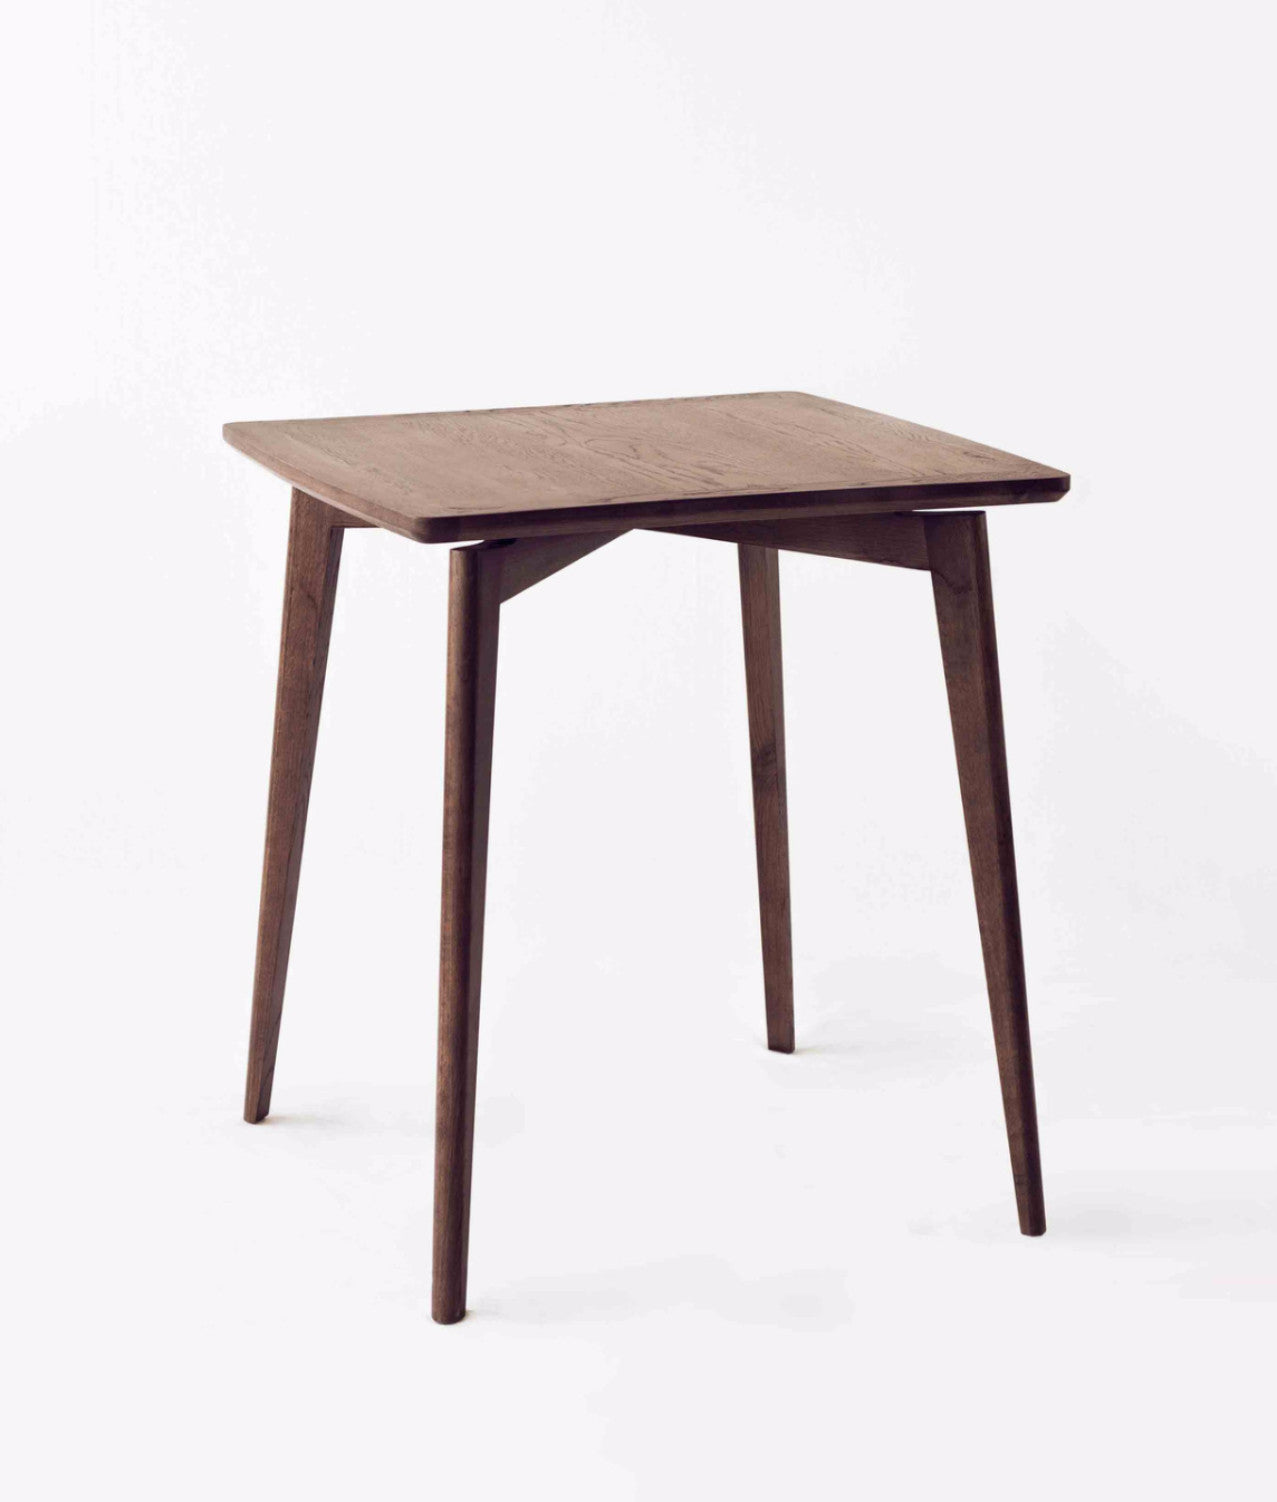 TOGETHER TABLE Table ziinlife Walnut Brown